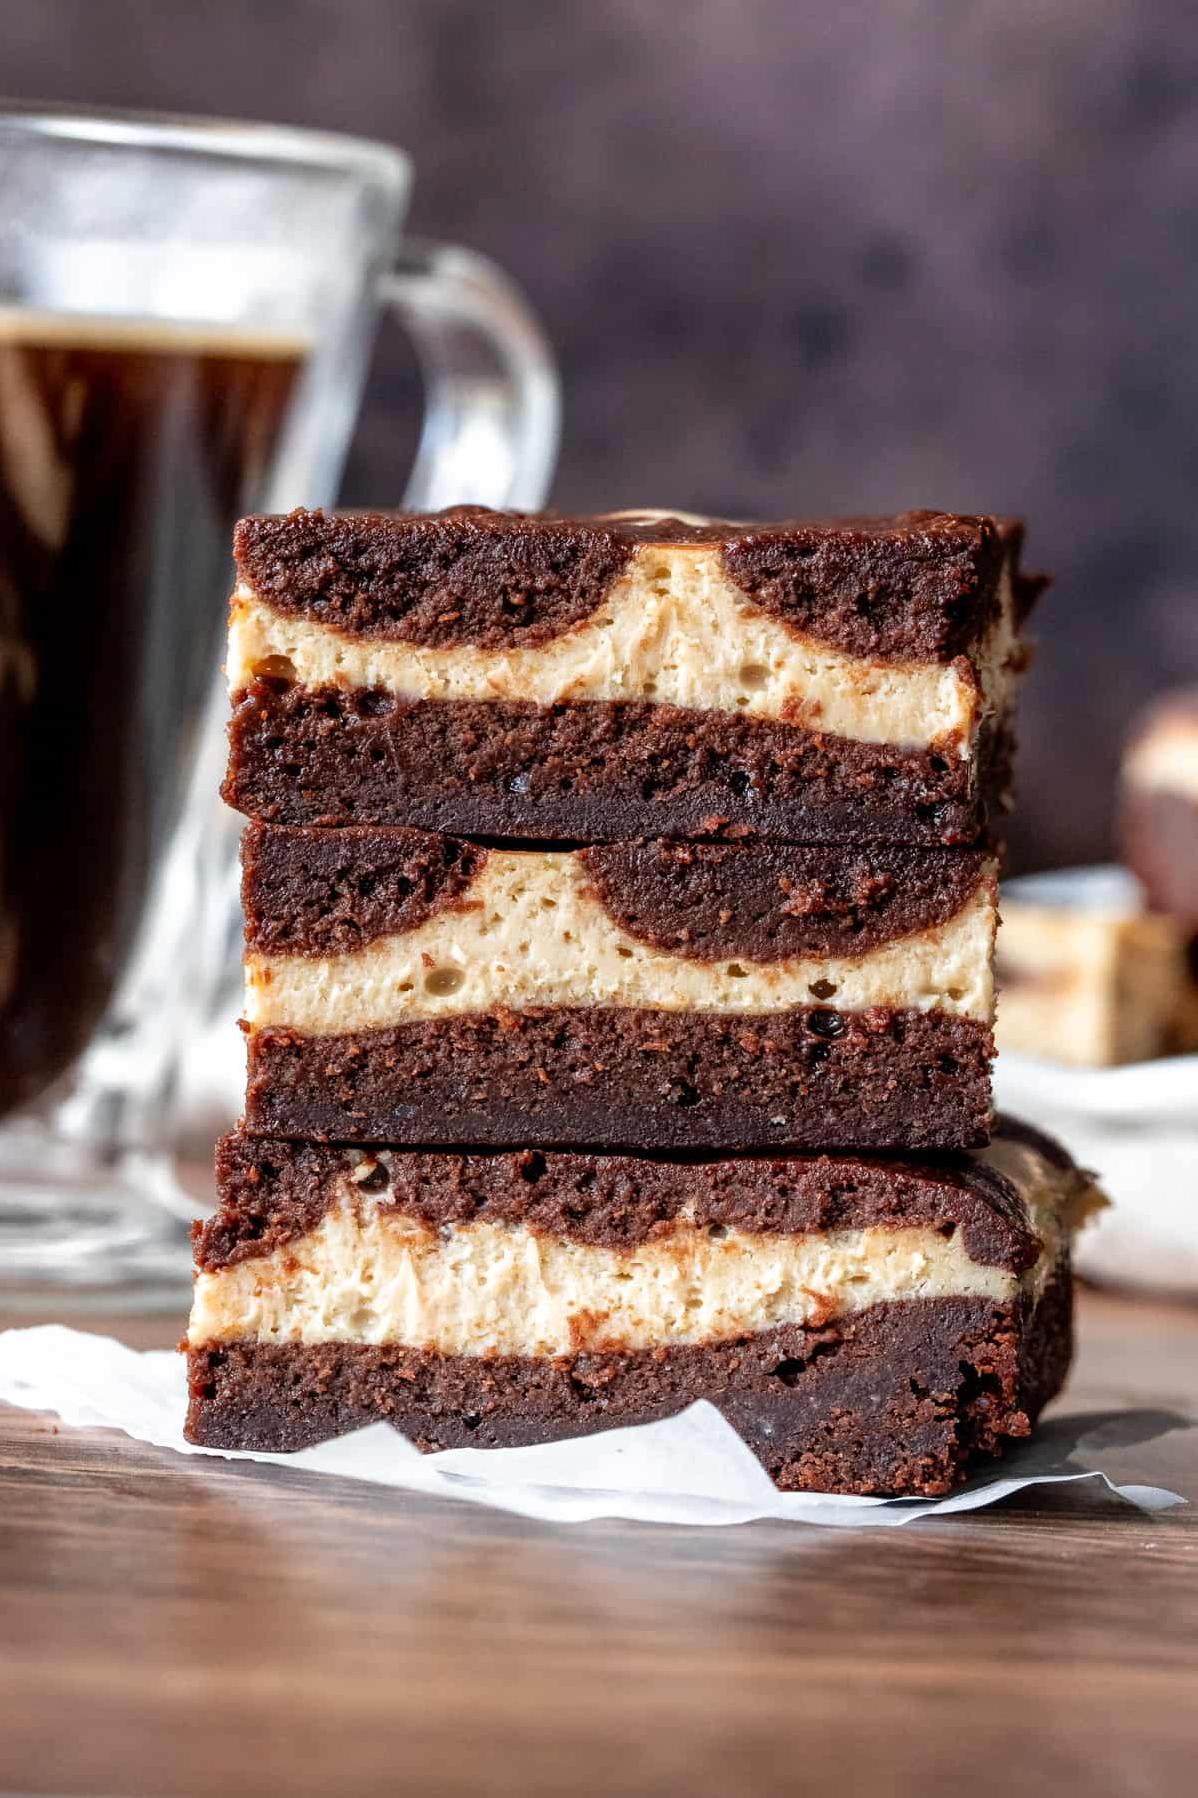  These coffee-infused brownies will leave you feeling warm and cozy inside.